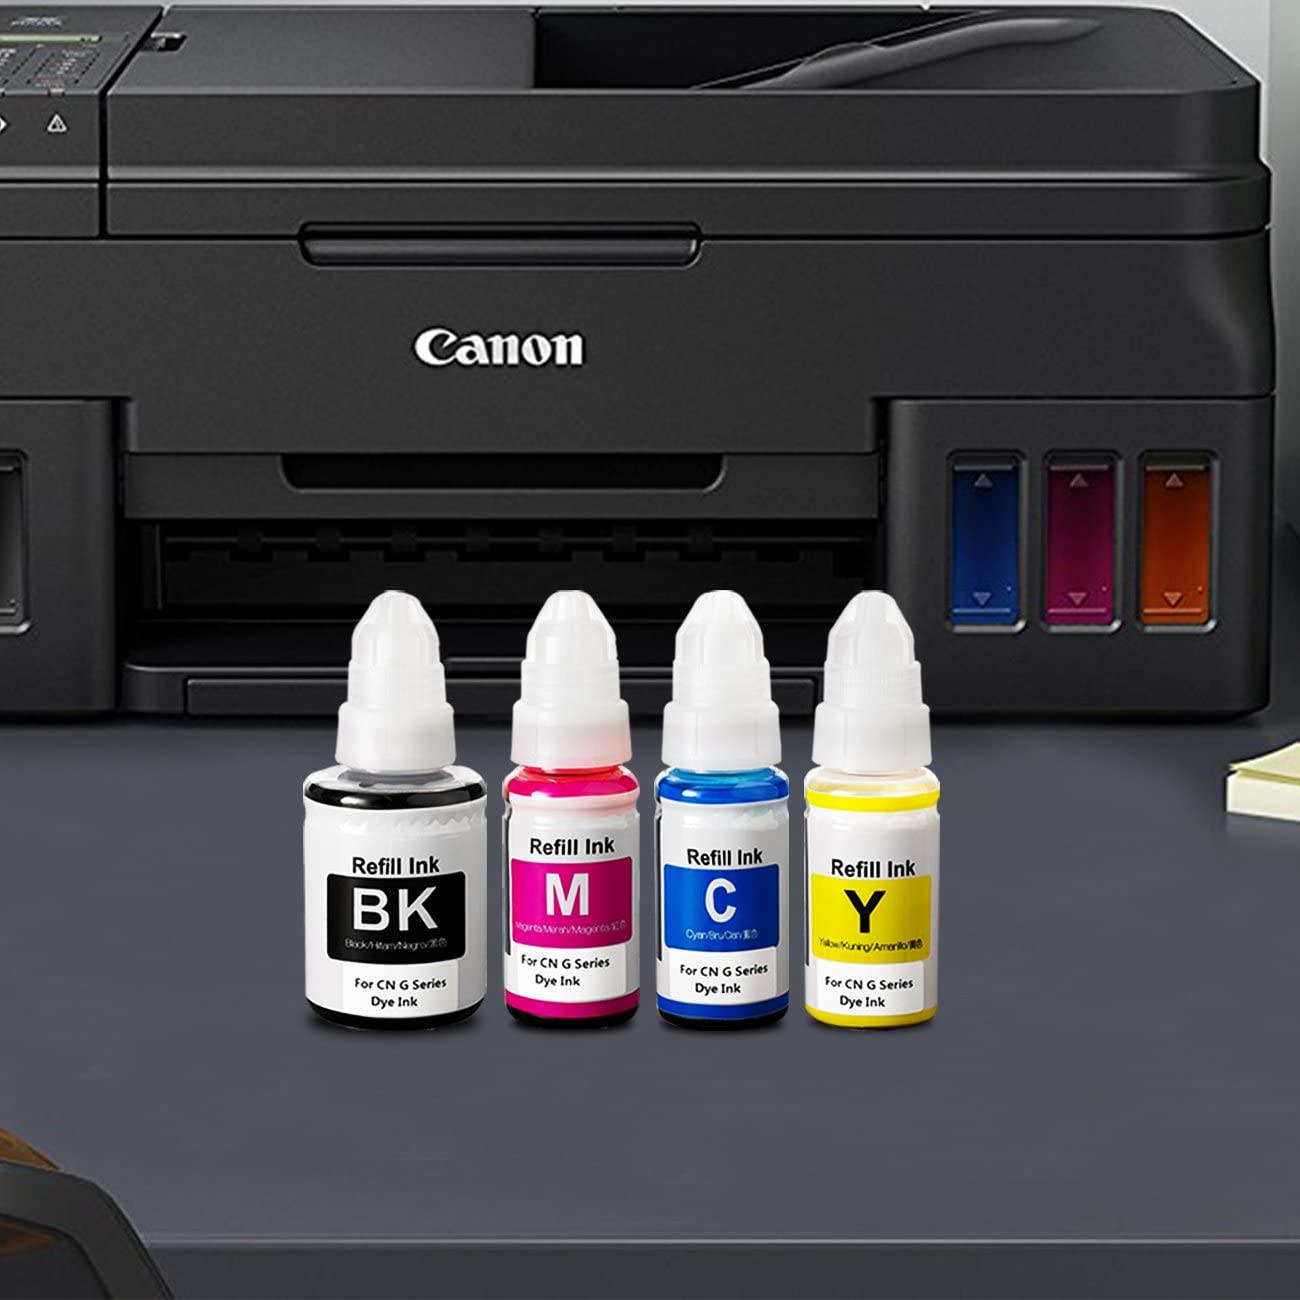 Printers Jack Compatible Canon GI-290 Refill Ink Bottle Kit for Canon PIXMA G4200, PIXMA G3200, PIXMA G4210, PIXMA G2200, PIXMA G1200 Printers